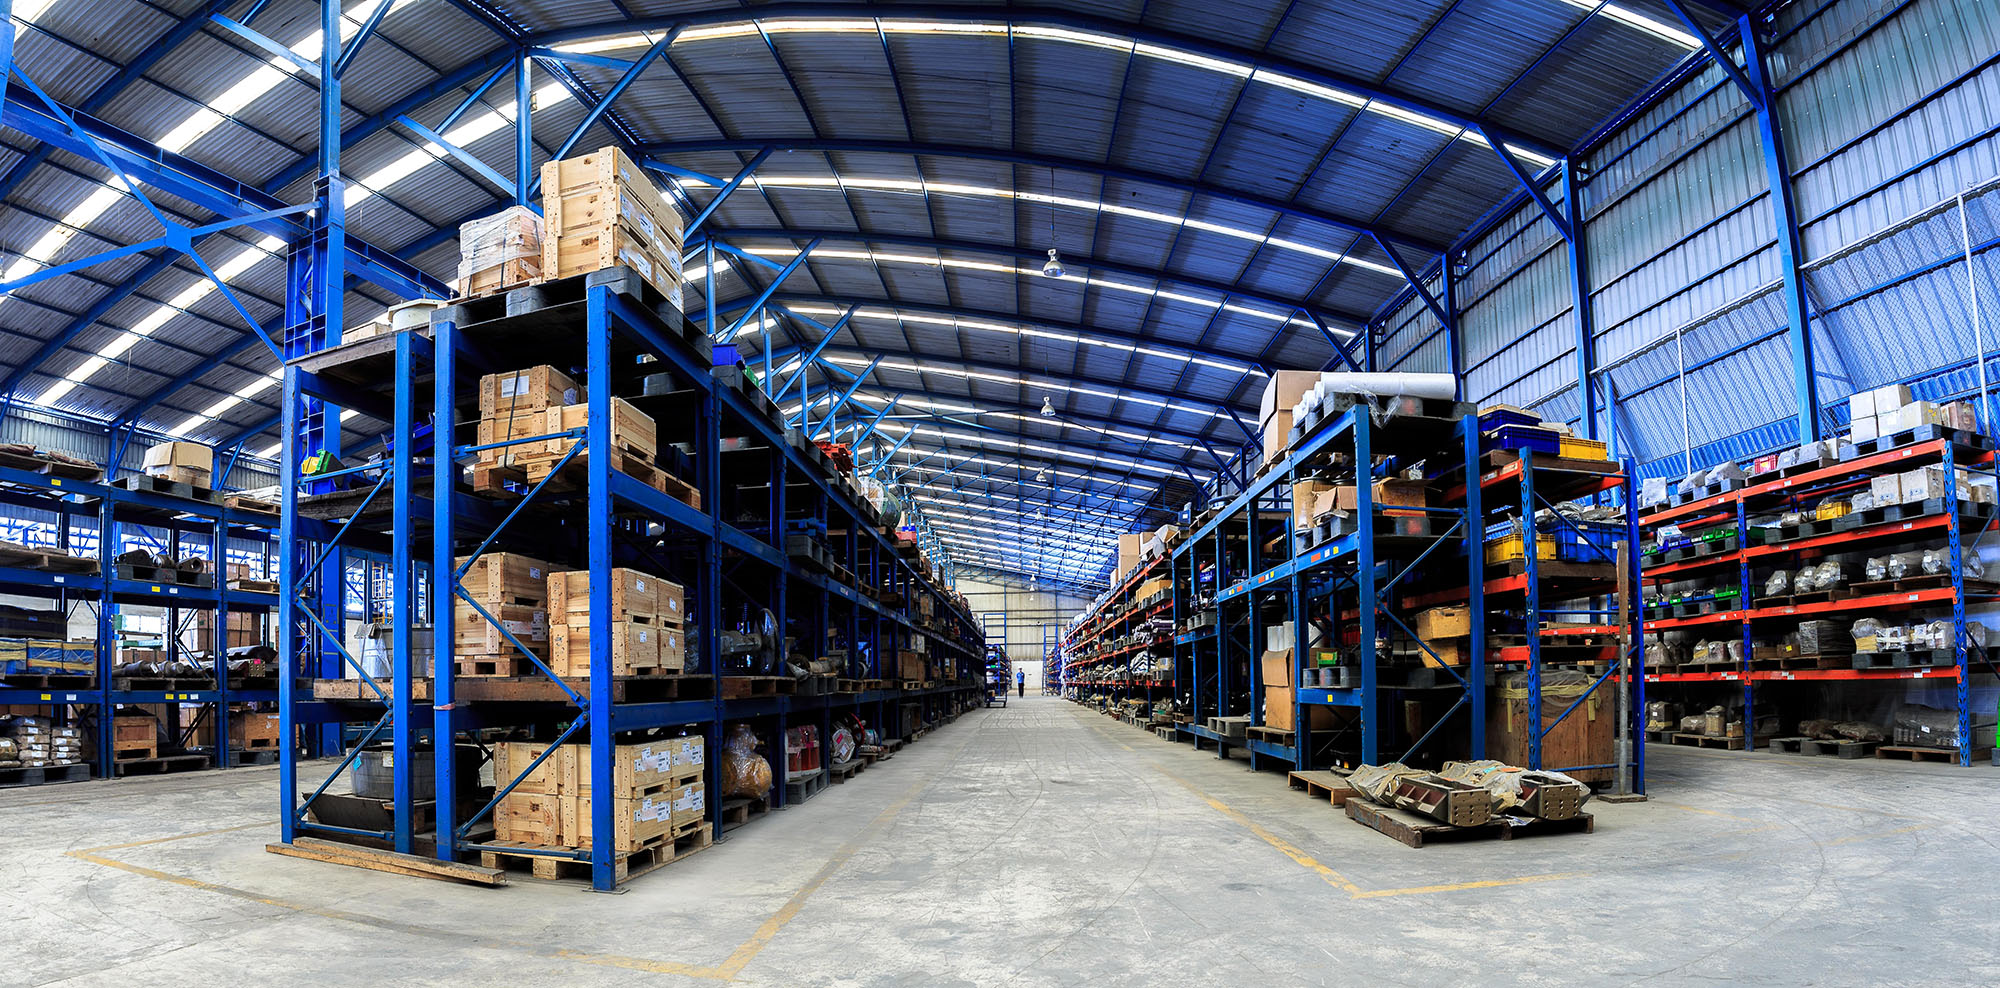 Industrials warehouse for distribution and storage